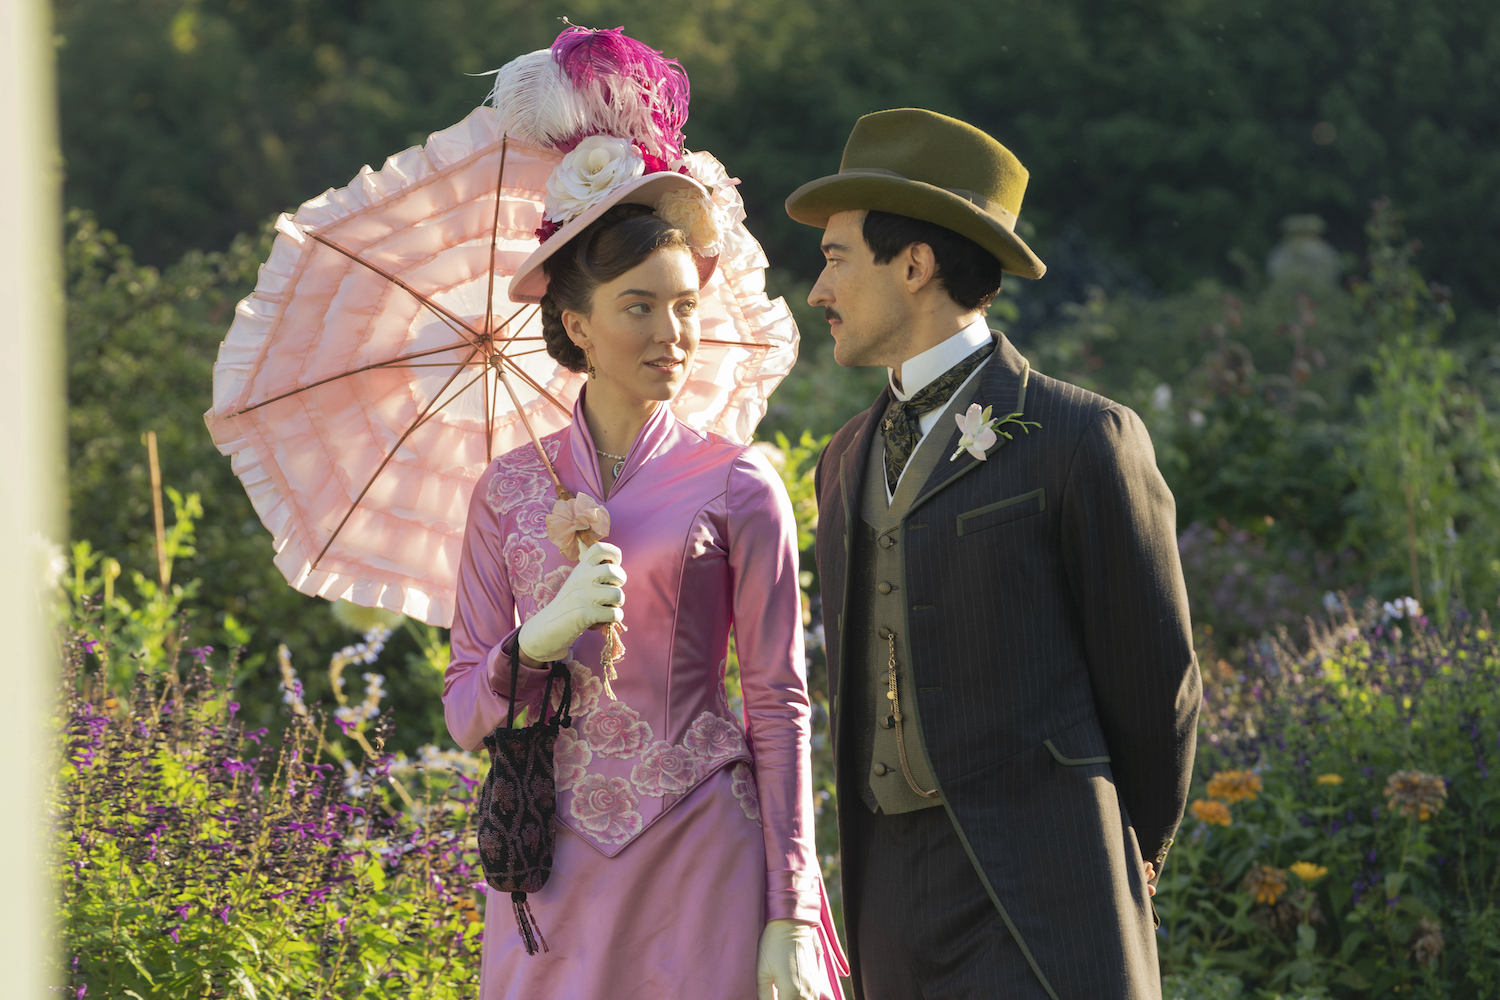  Blake Ritson and Nicole Bryden Bloom in "The Gilded Age" Season 2